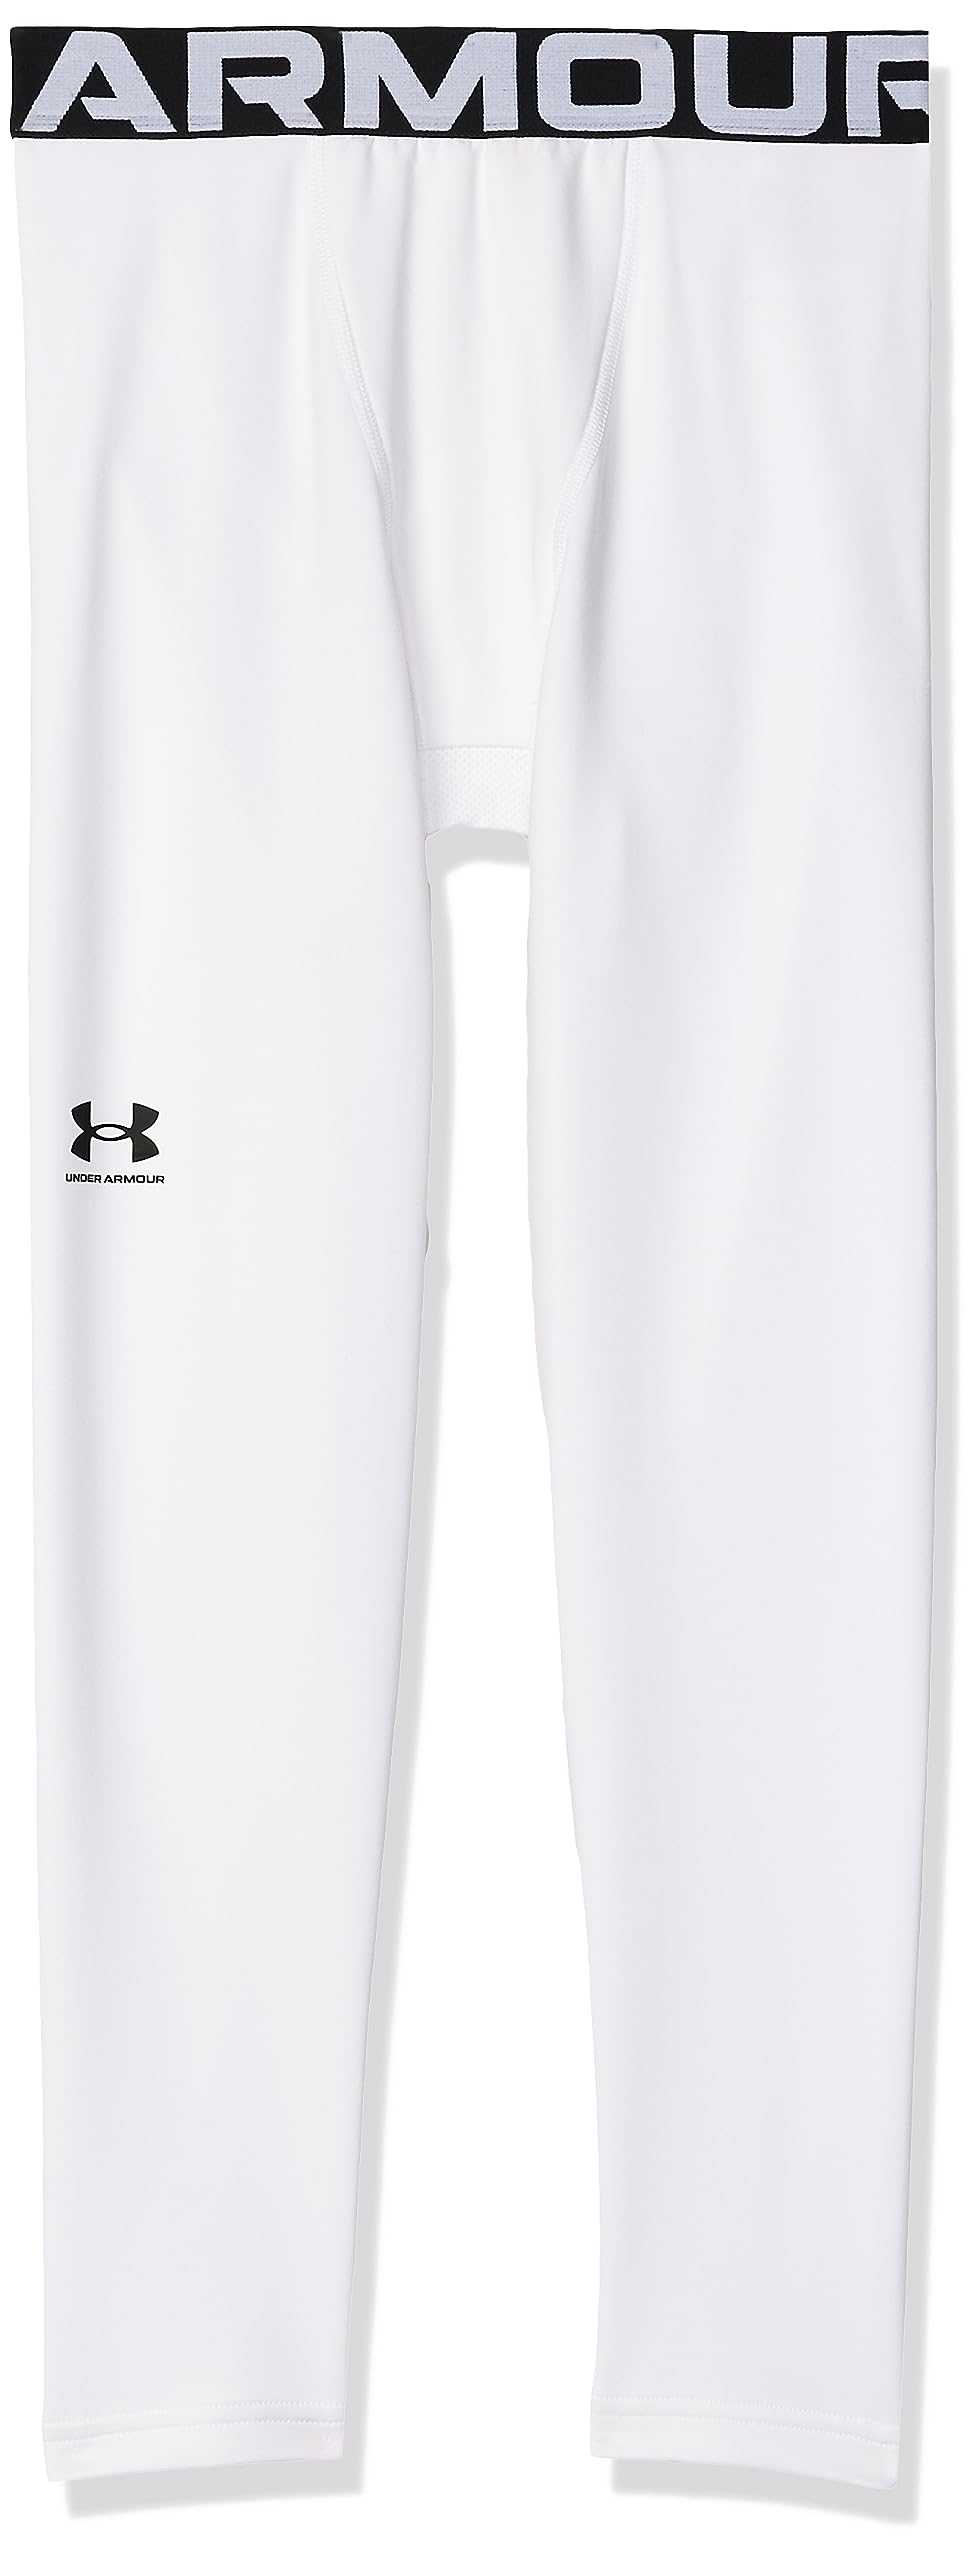 Under Armour Boys UA CG Armour Leggings, Ultra-Warm Thermal Leggings, Stretchy Boys Thermal Base Layer for Running and Winter Sports Training with Anti-Odour Technology